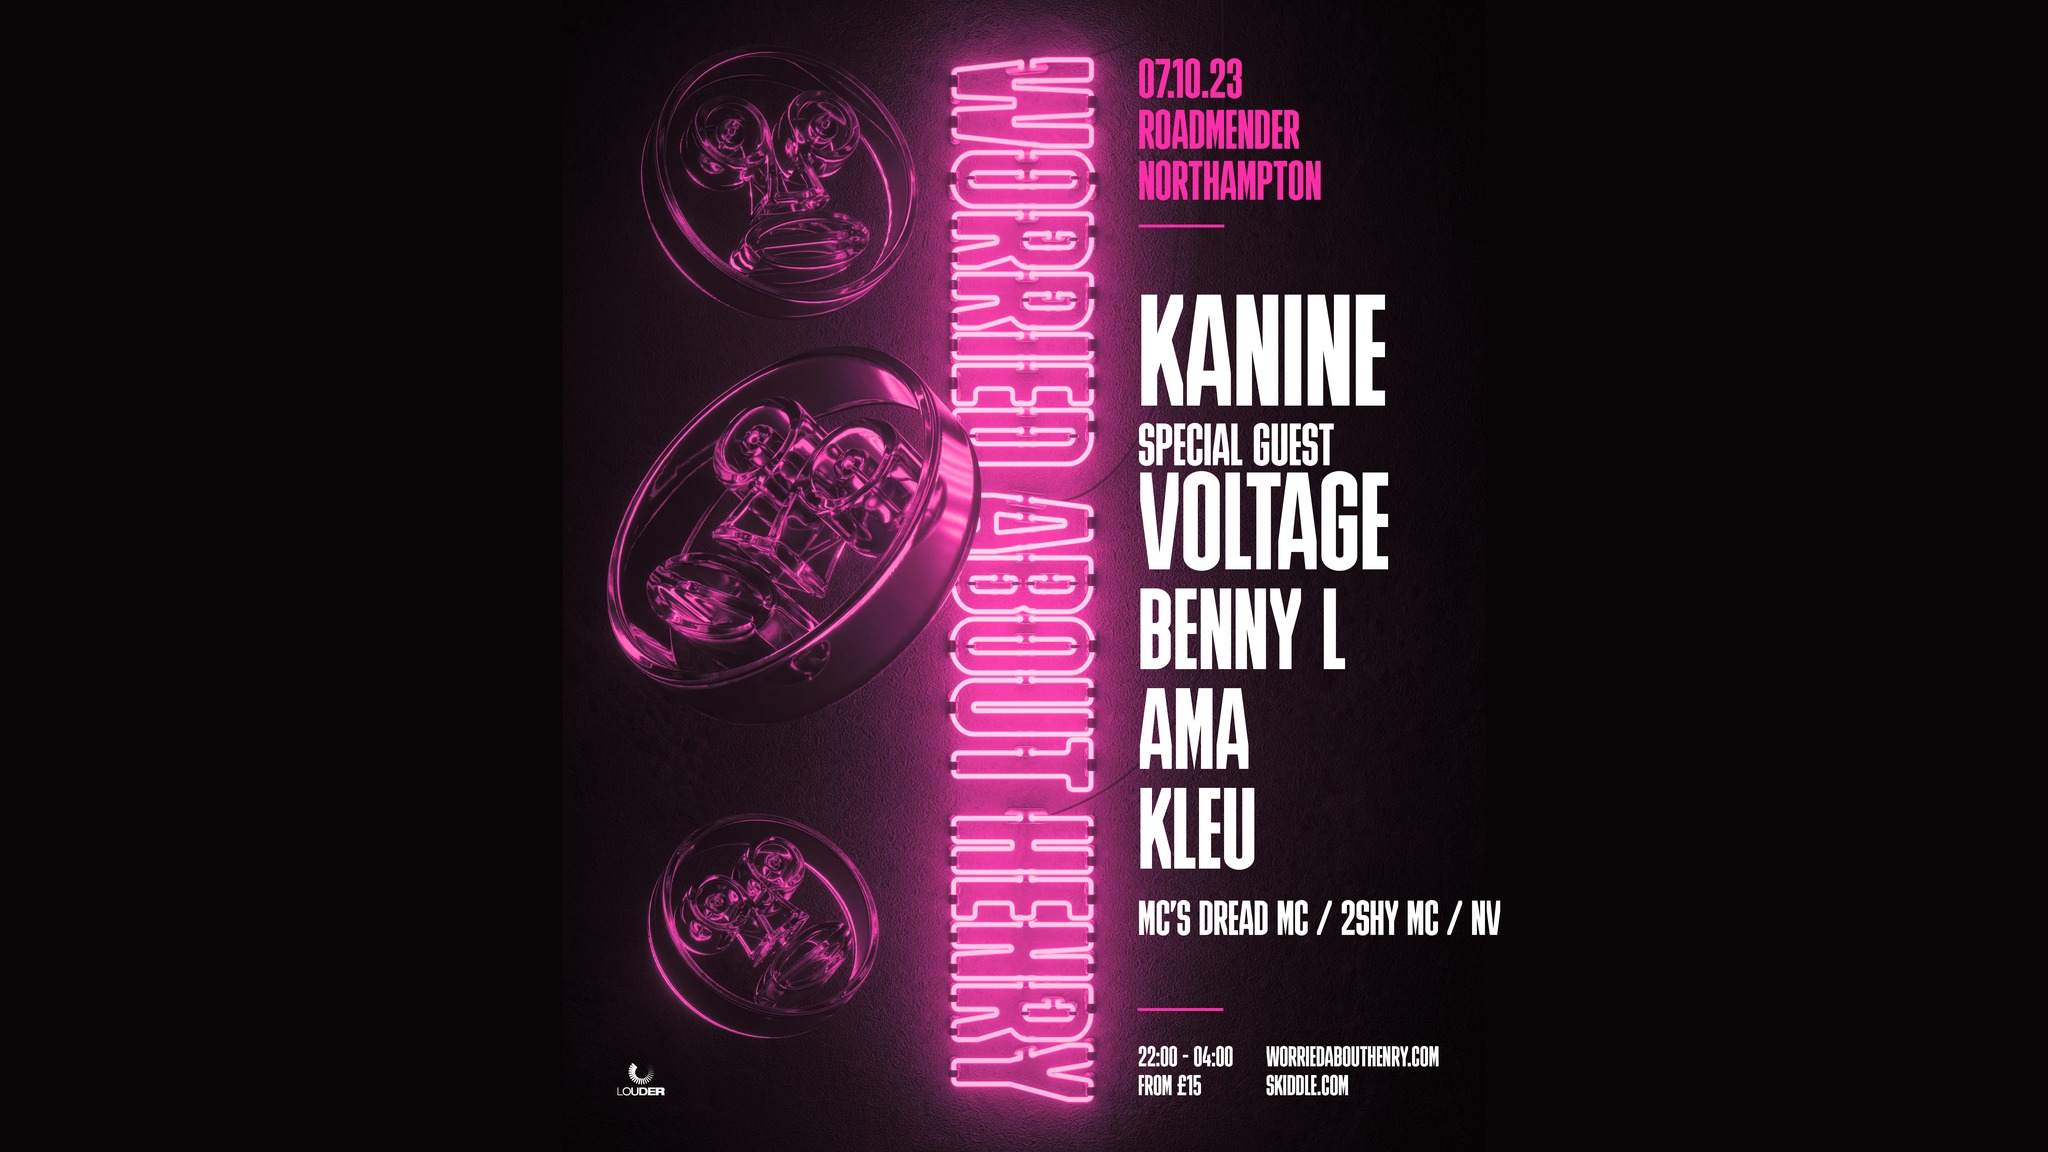 Worried About Henry presents: Kanine, Voltage, Benny L - フライヤー表